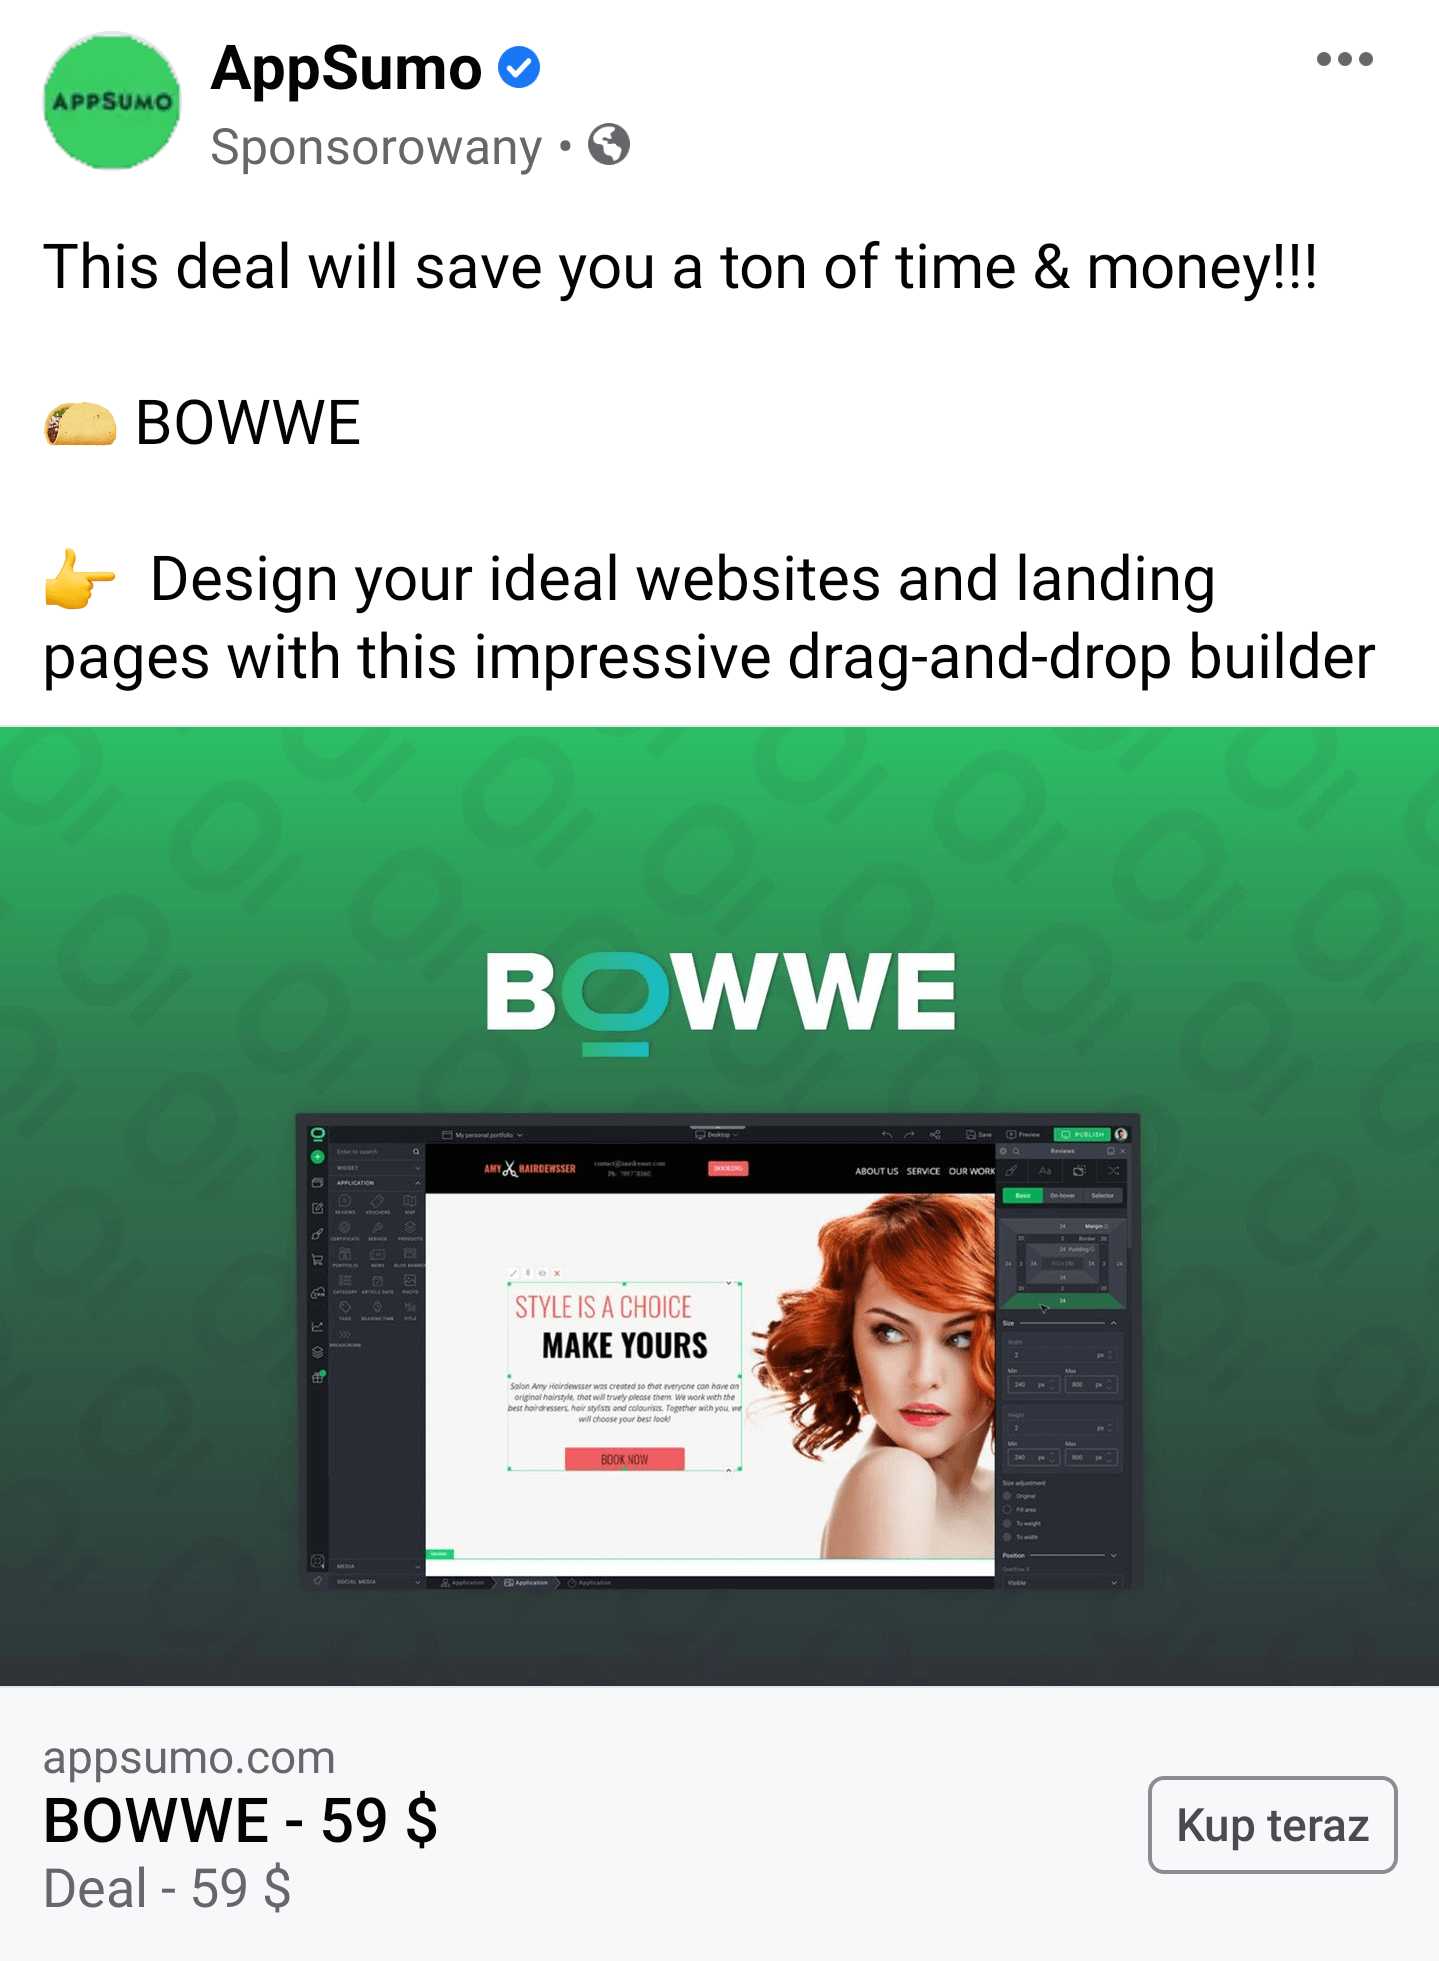 Ads with BOWWE by Appsumo